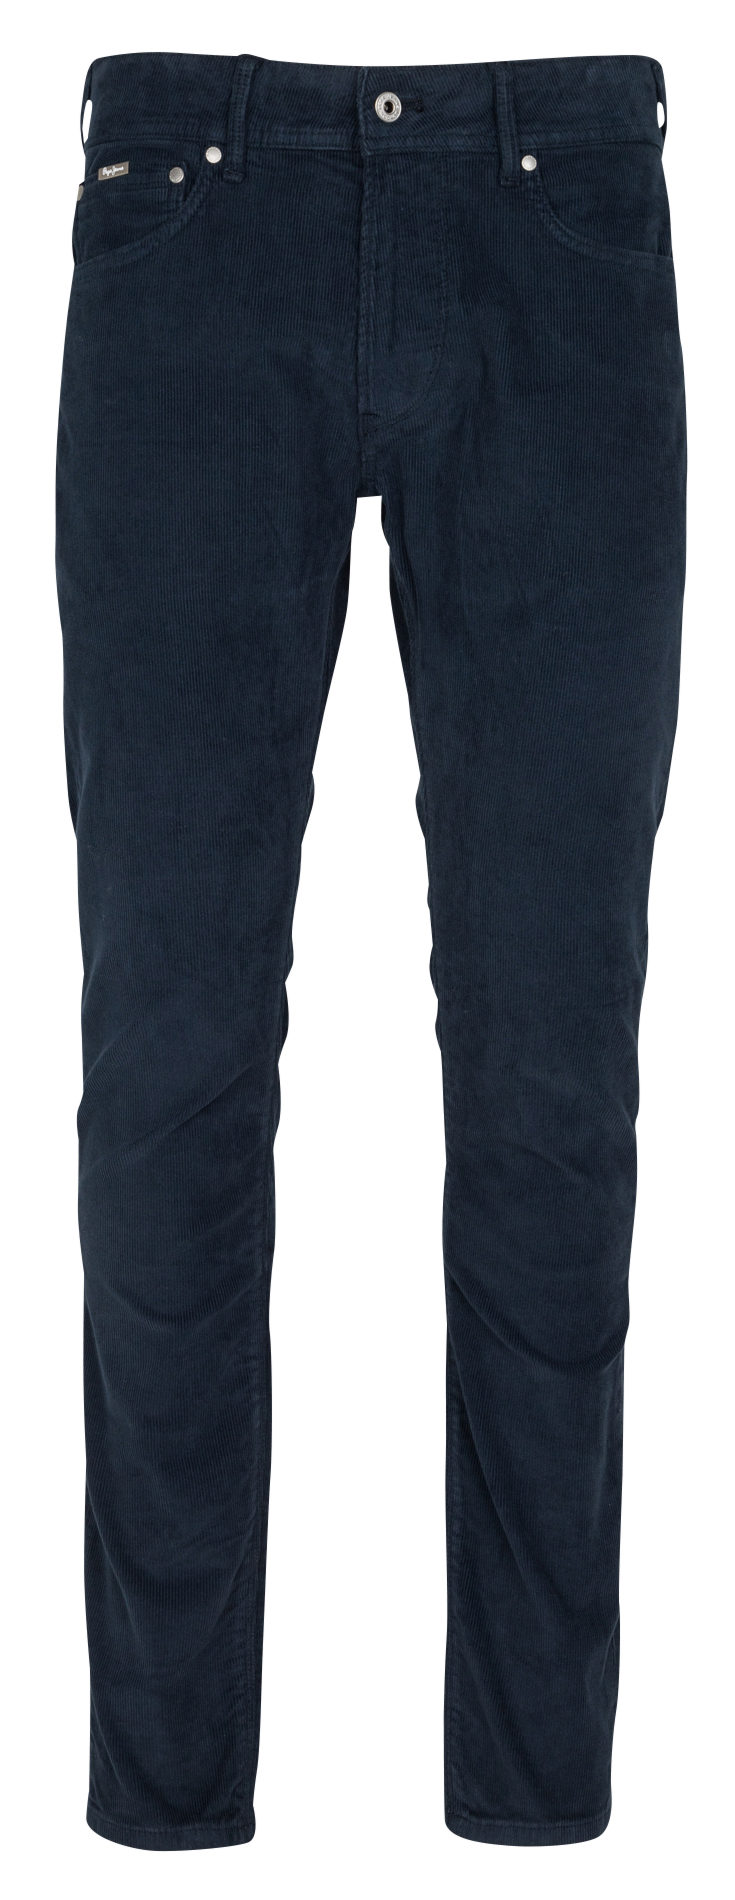 Buy Pepe Jeans Men Navy Blue Harbor Slim Fit Solid Corduroy Trousers -  Trousers for Men 7388513 | Myntra